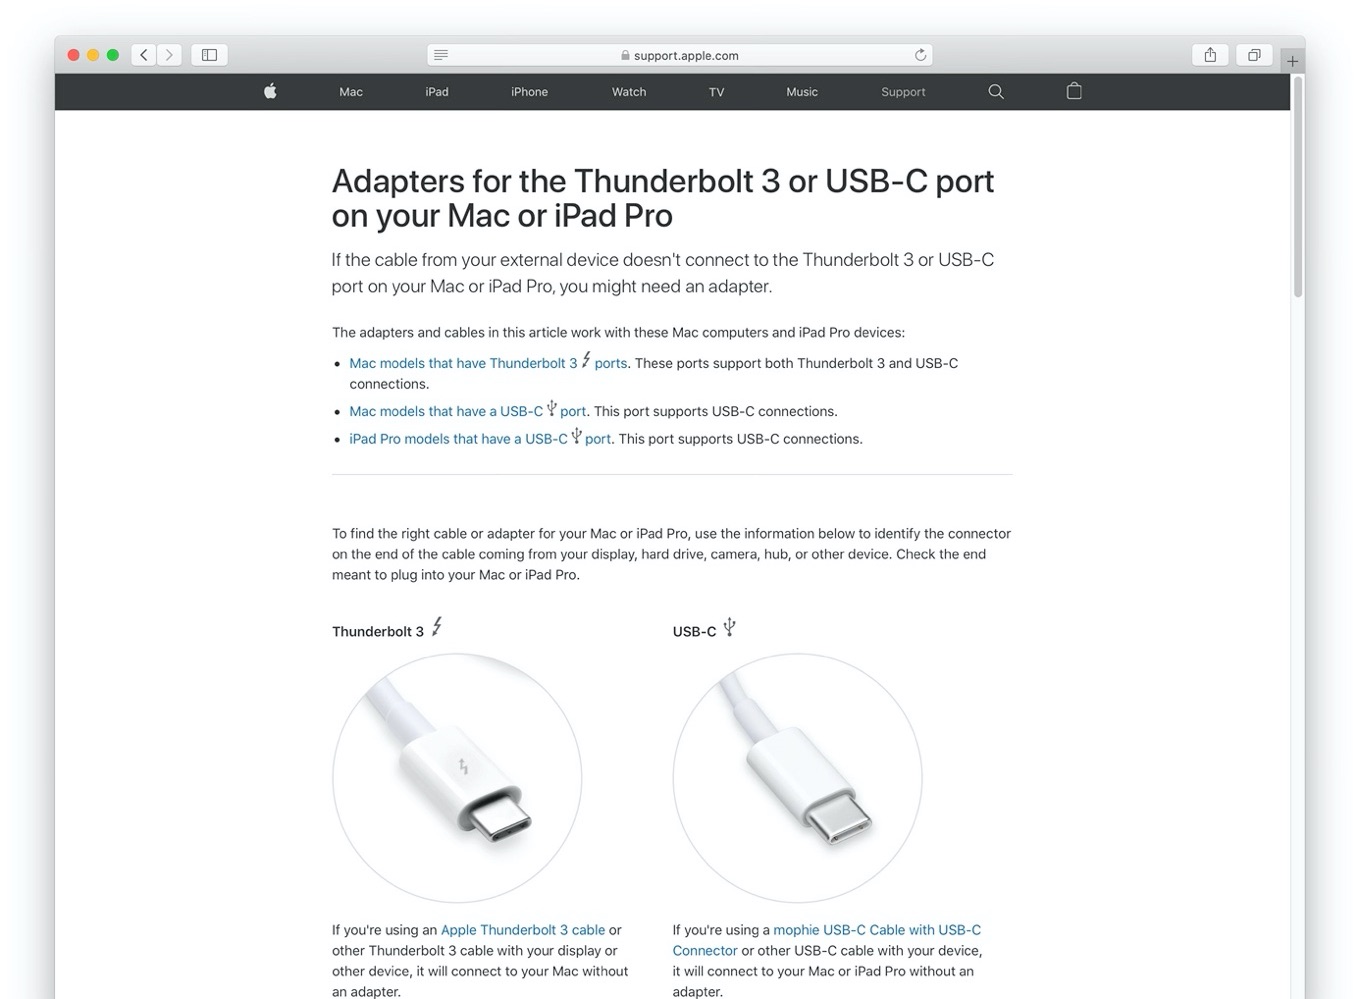 Adapters for the Thunderbolt 3 or USB-C port on your Mac or iPad Pro